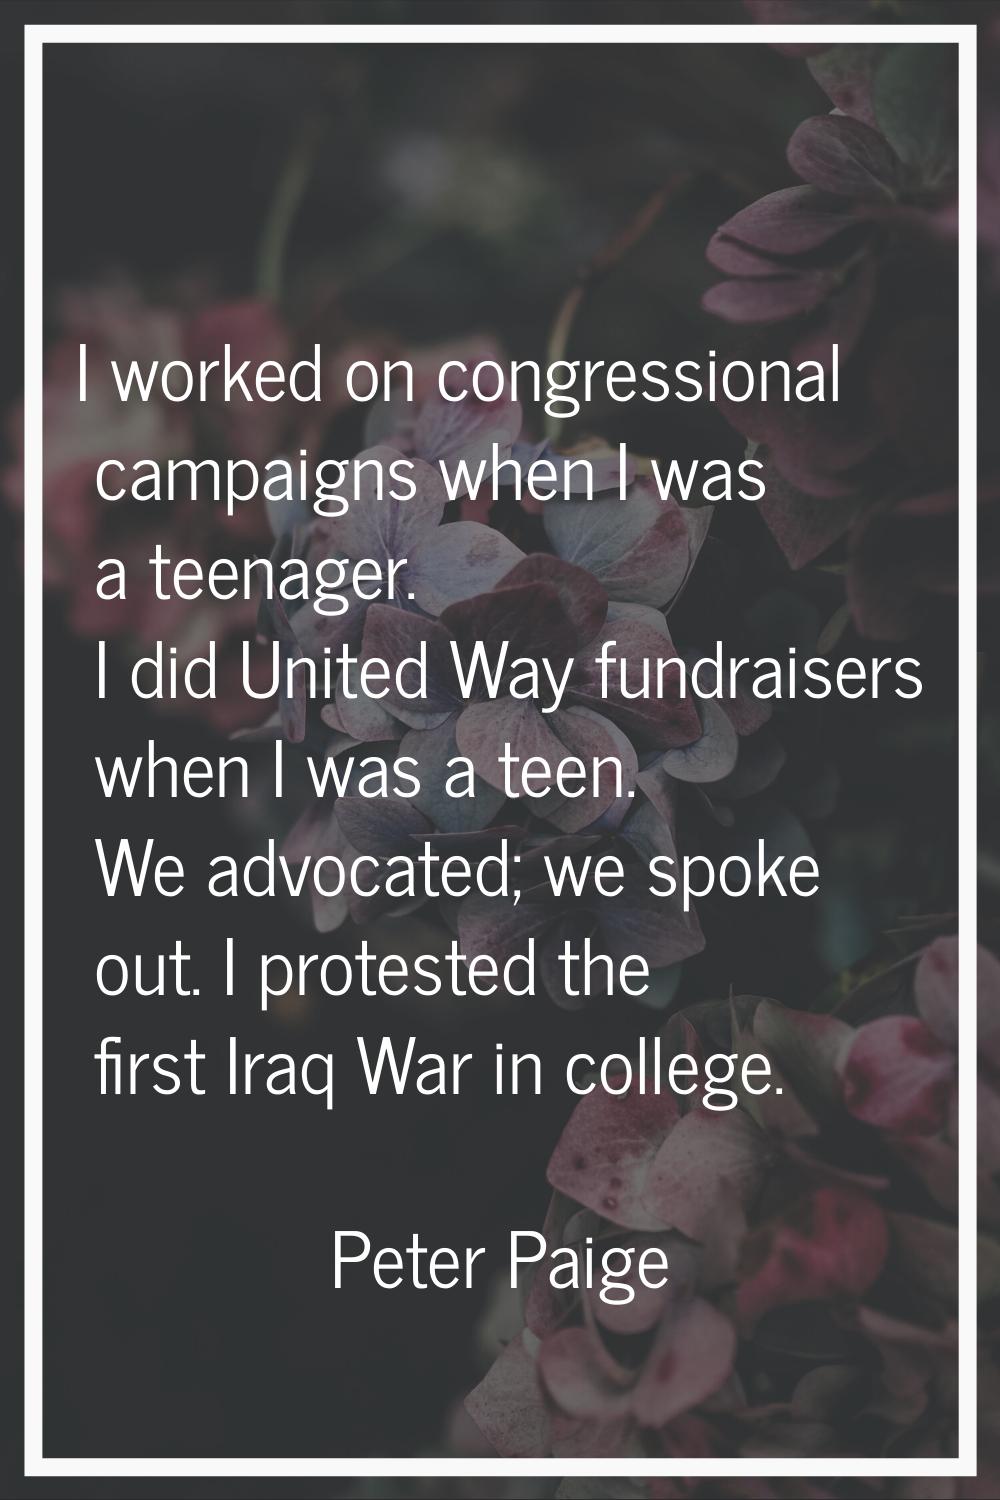 I worked on congressional campaigns when I was a teenager. I did United Way fundraisers when I was 